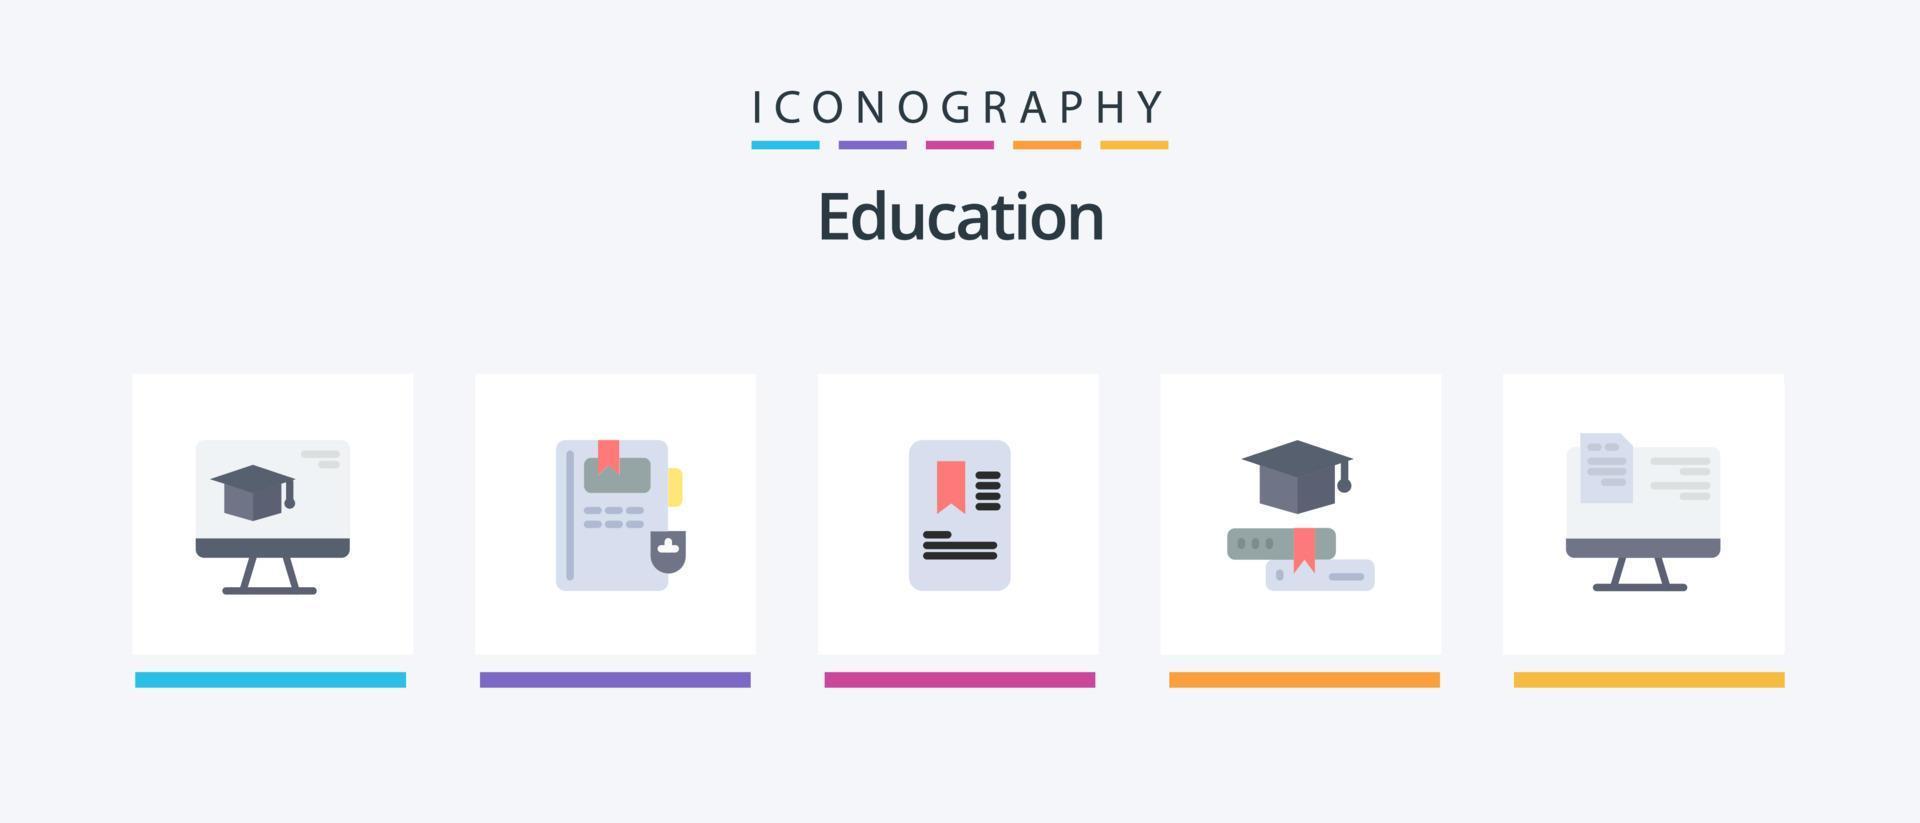 Education Flat 5 Icon Pack Including online. file. tag. computer. education. Creative Icons Design vector